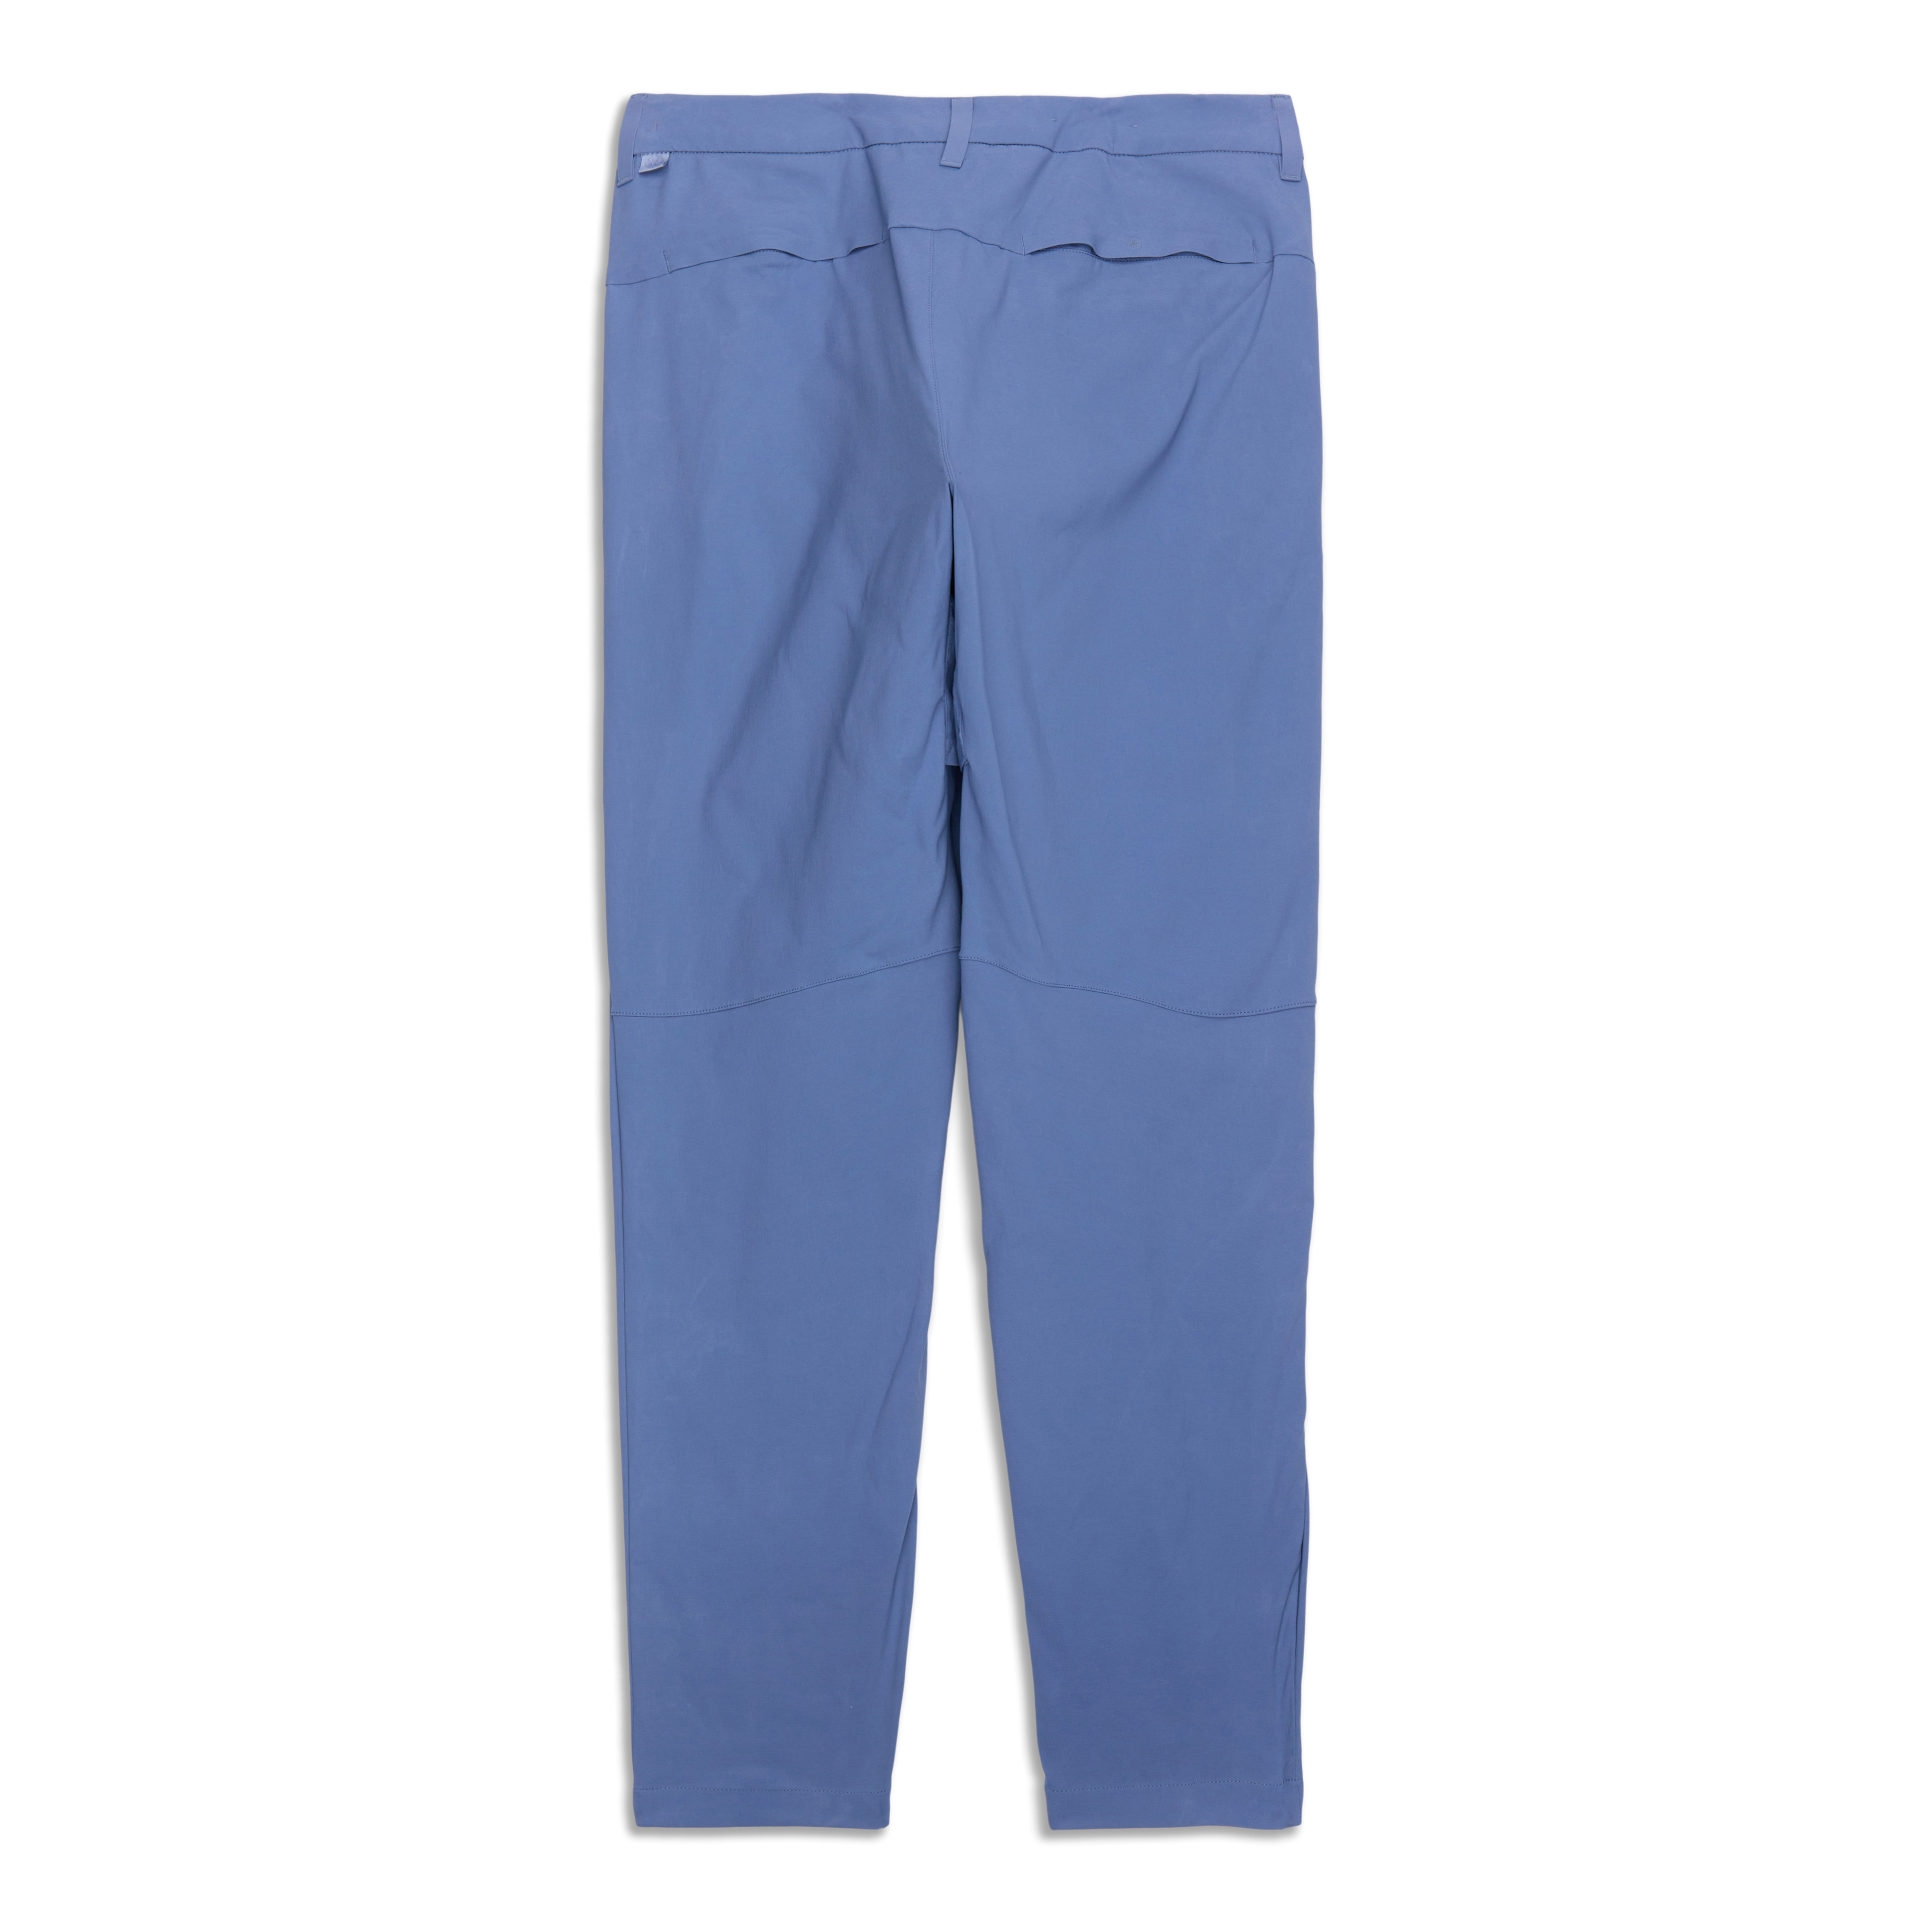 Commission Golf Pant 30, classic navy